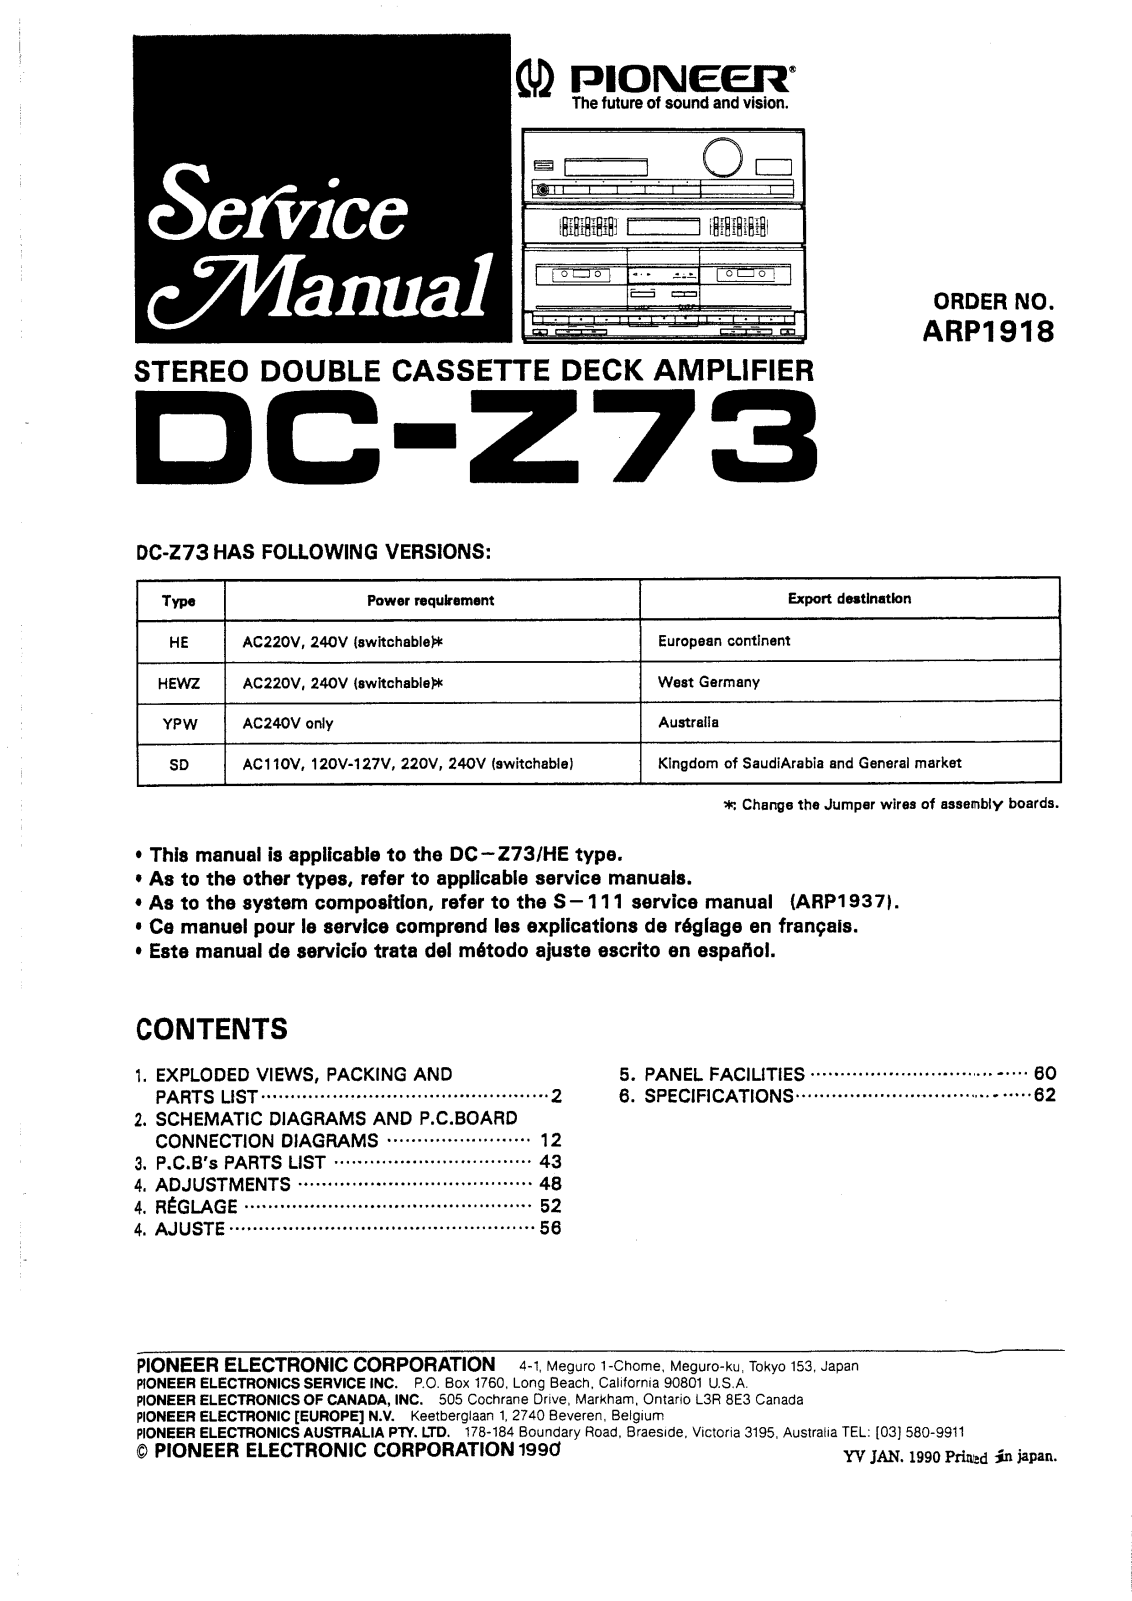 Pioneer DCZ-73 Service manual